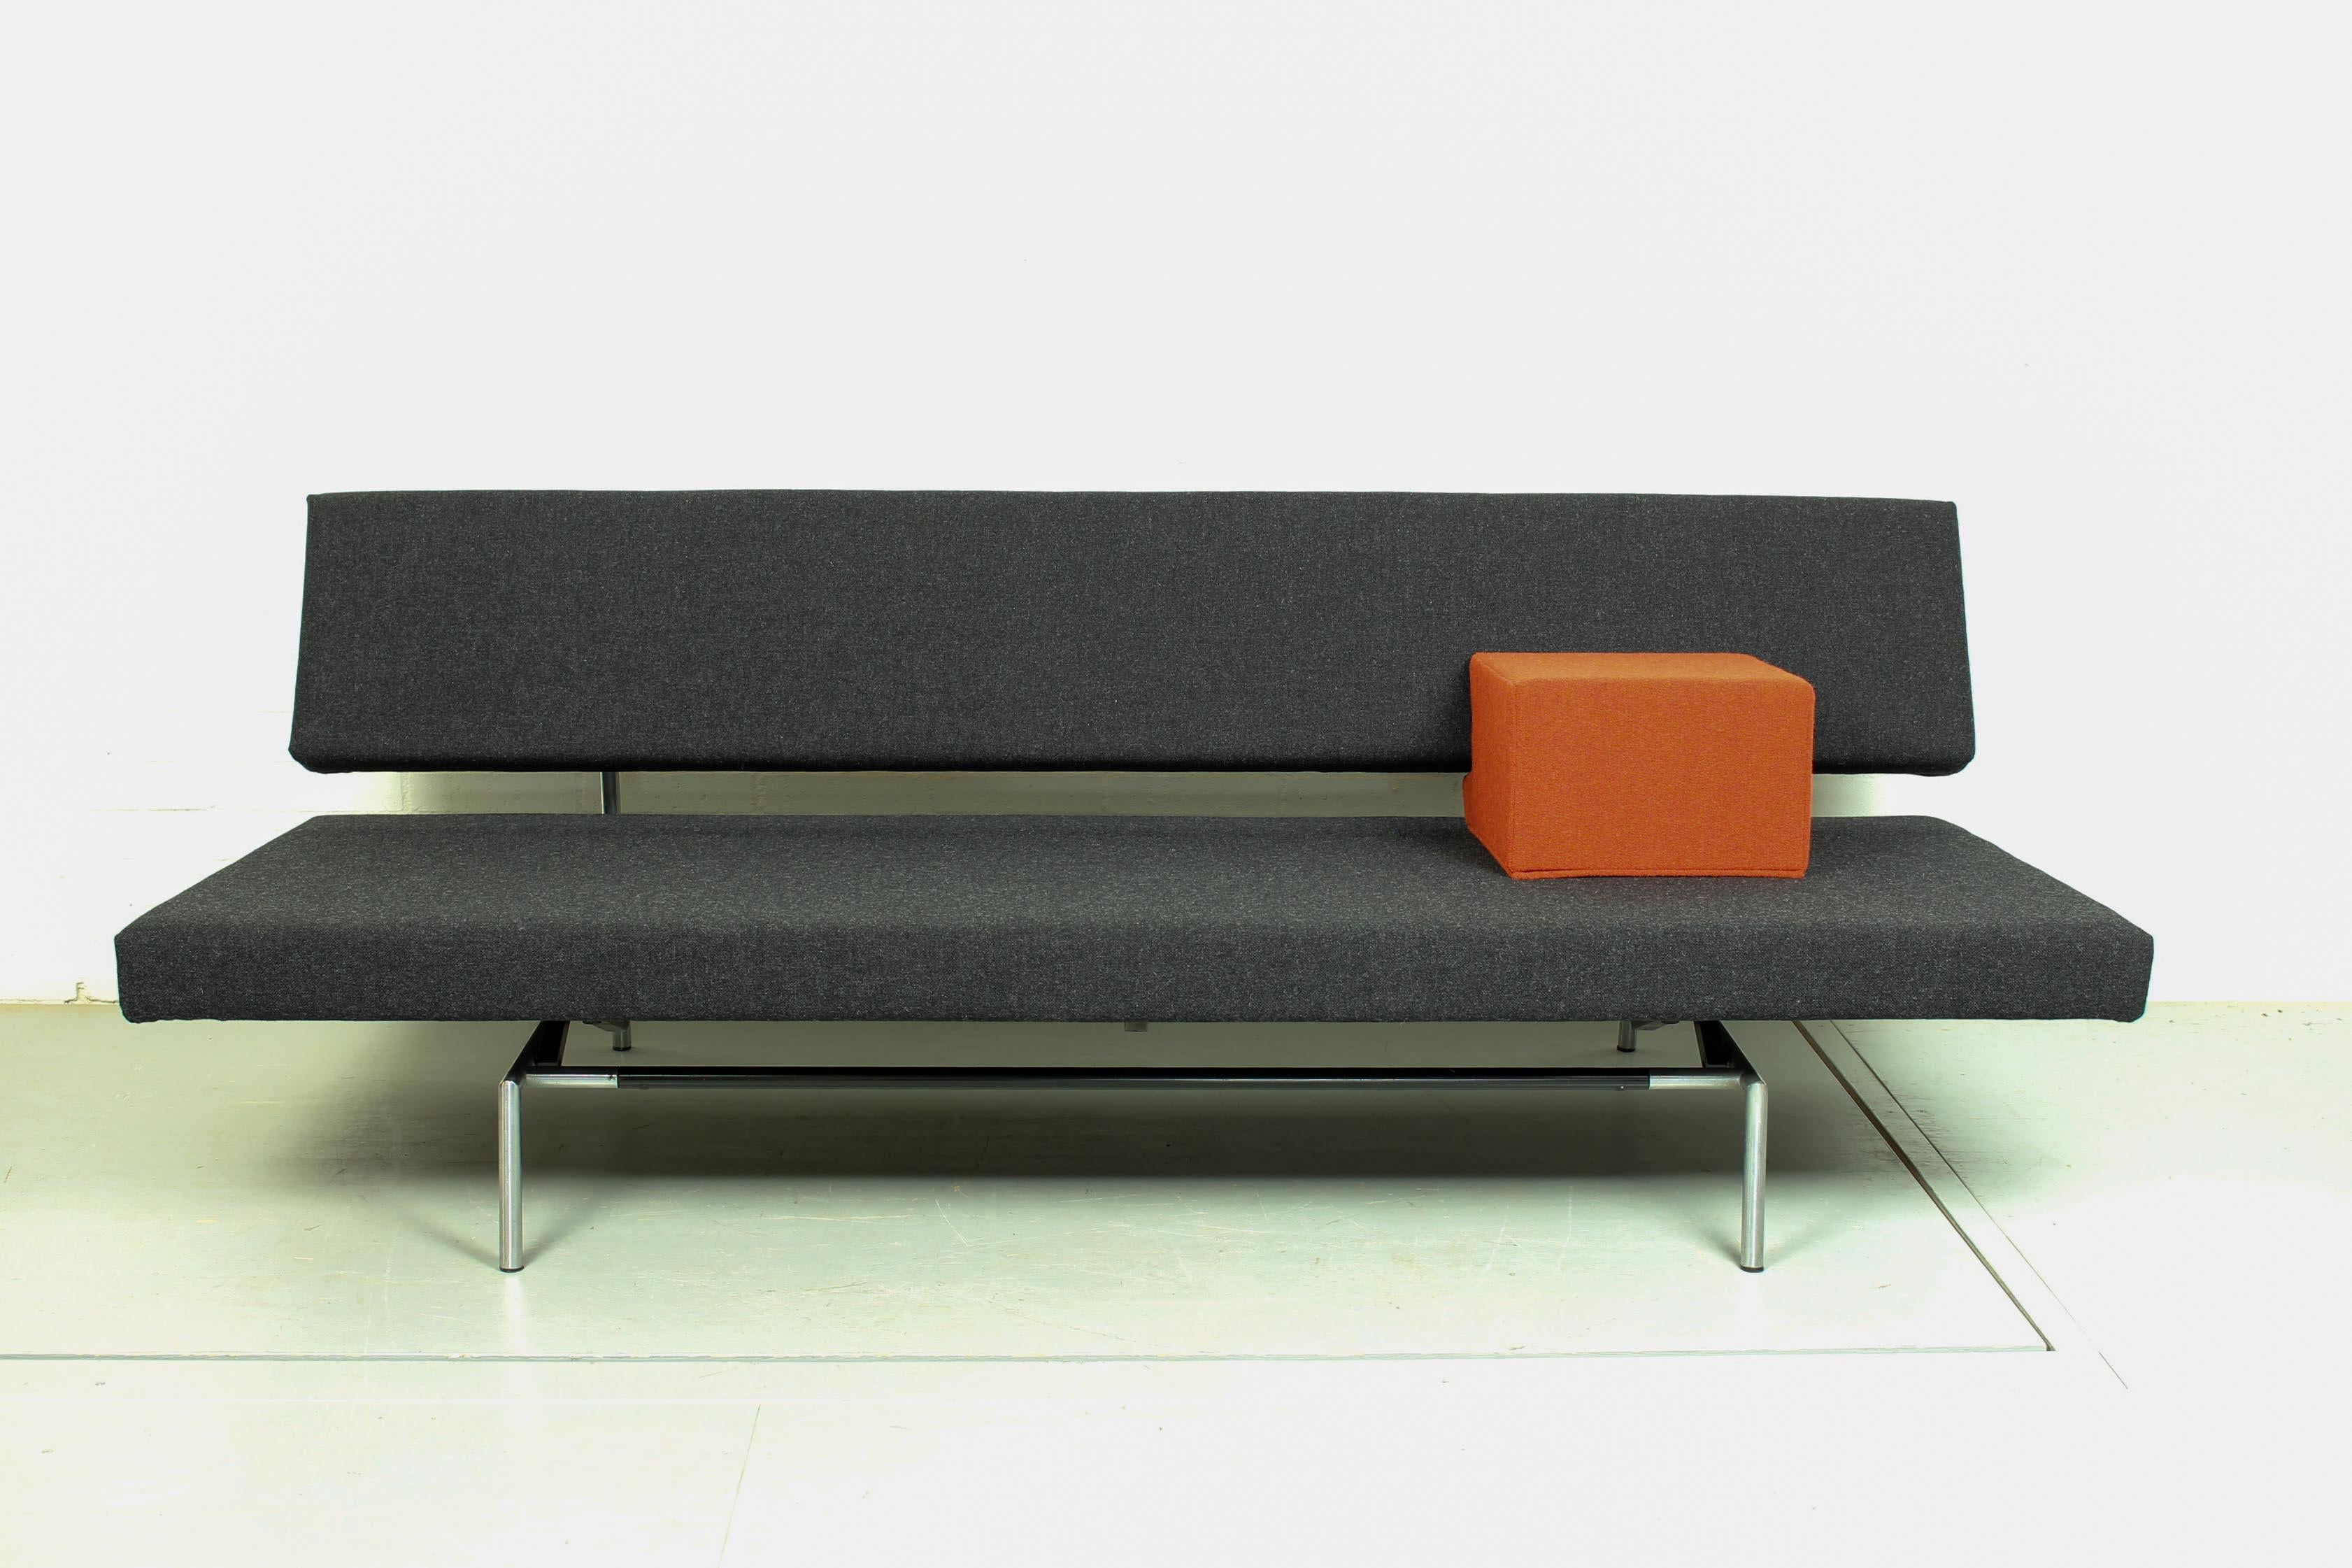 Martin Visser designed this sofa BR 02.7 in the late 1950s. The sofa has been in production with SPECTRUM – Holland ever since. One loose armrest in the color of your choice (blue or orange) is added. A simple movement converts the sofa into a sofa